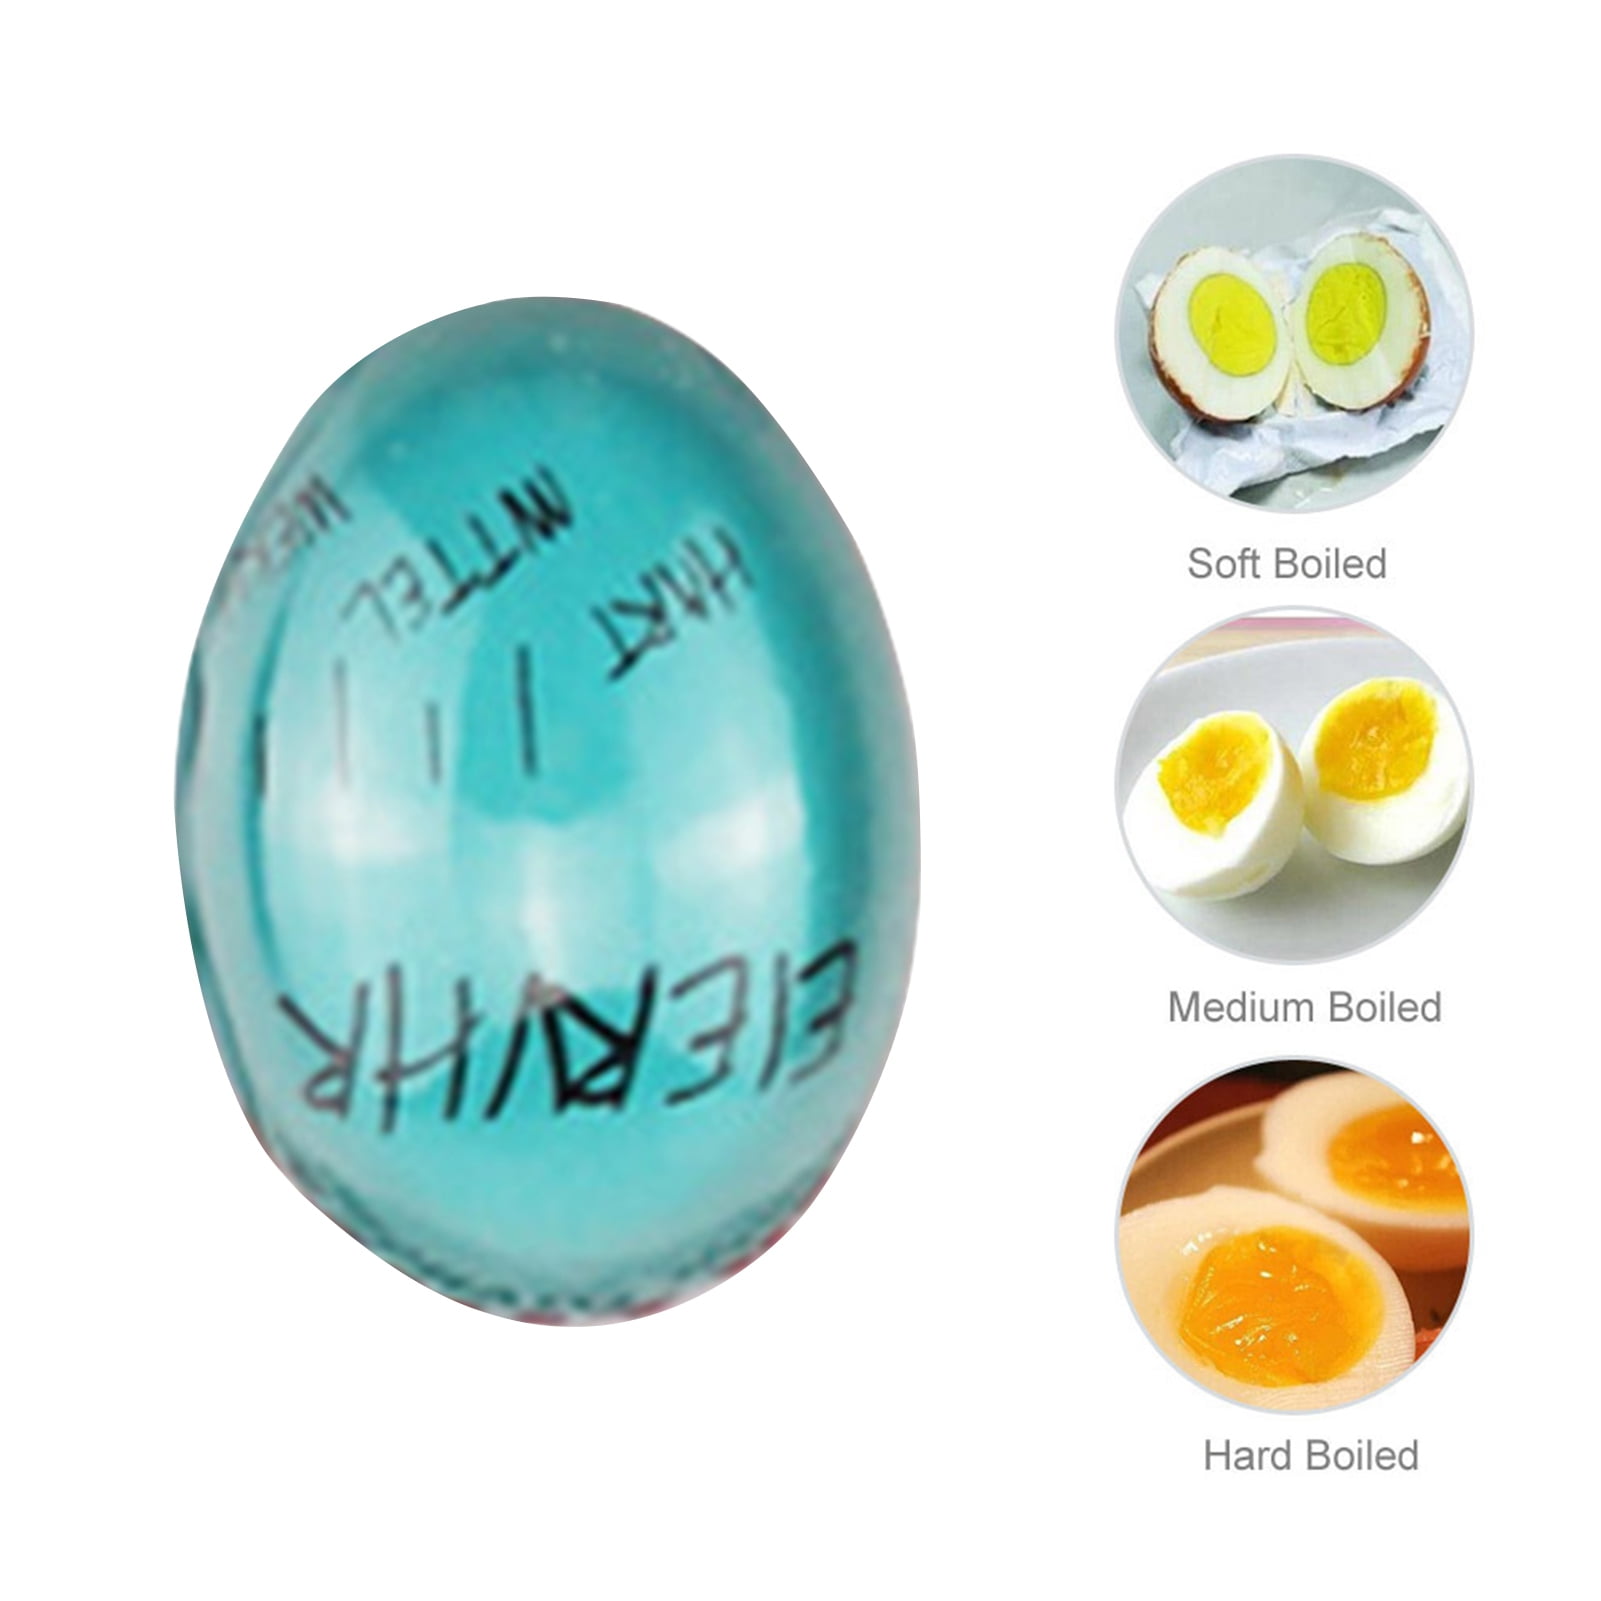 Fourone 1111fourone Egg Timer Water Boiling Kitchen Egg Cooker Color Changing Resin Cooking Helper Reminder for Home Outdoors, Size: Small, As Shown